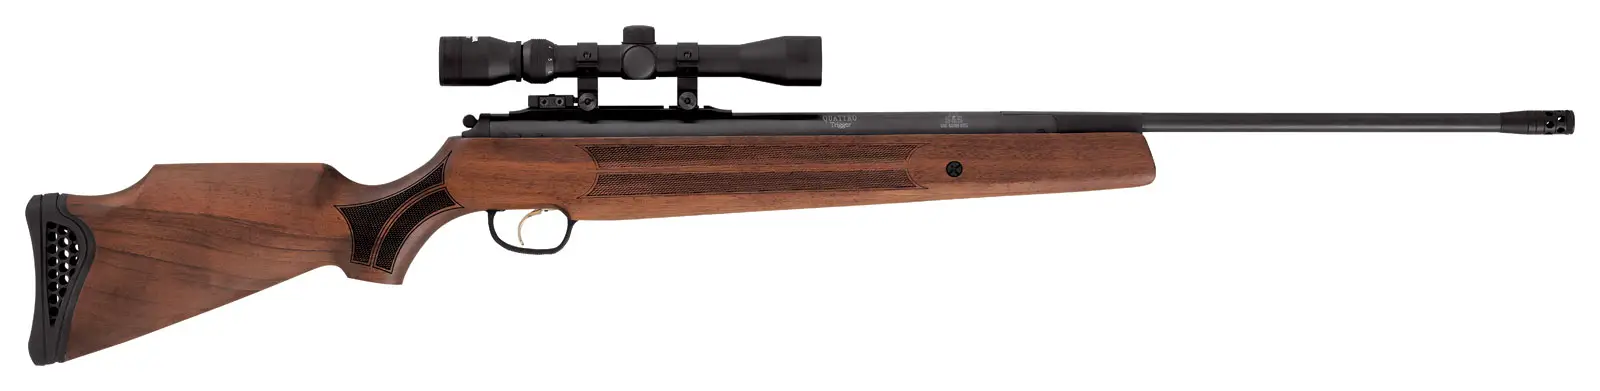 Mod 135 SP Best Break Barrel Air Rifle That Hits Like A Champ (Reviews and Buying Guide 2023)